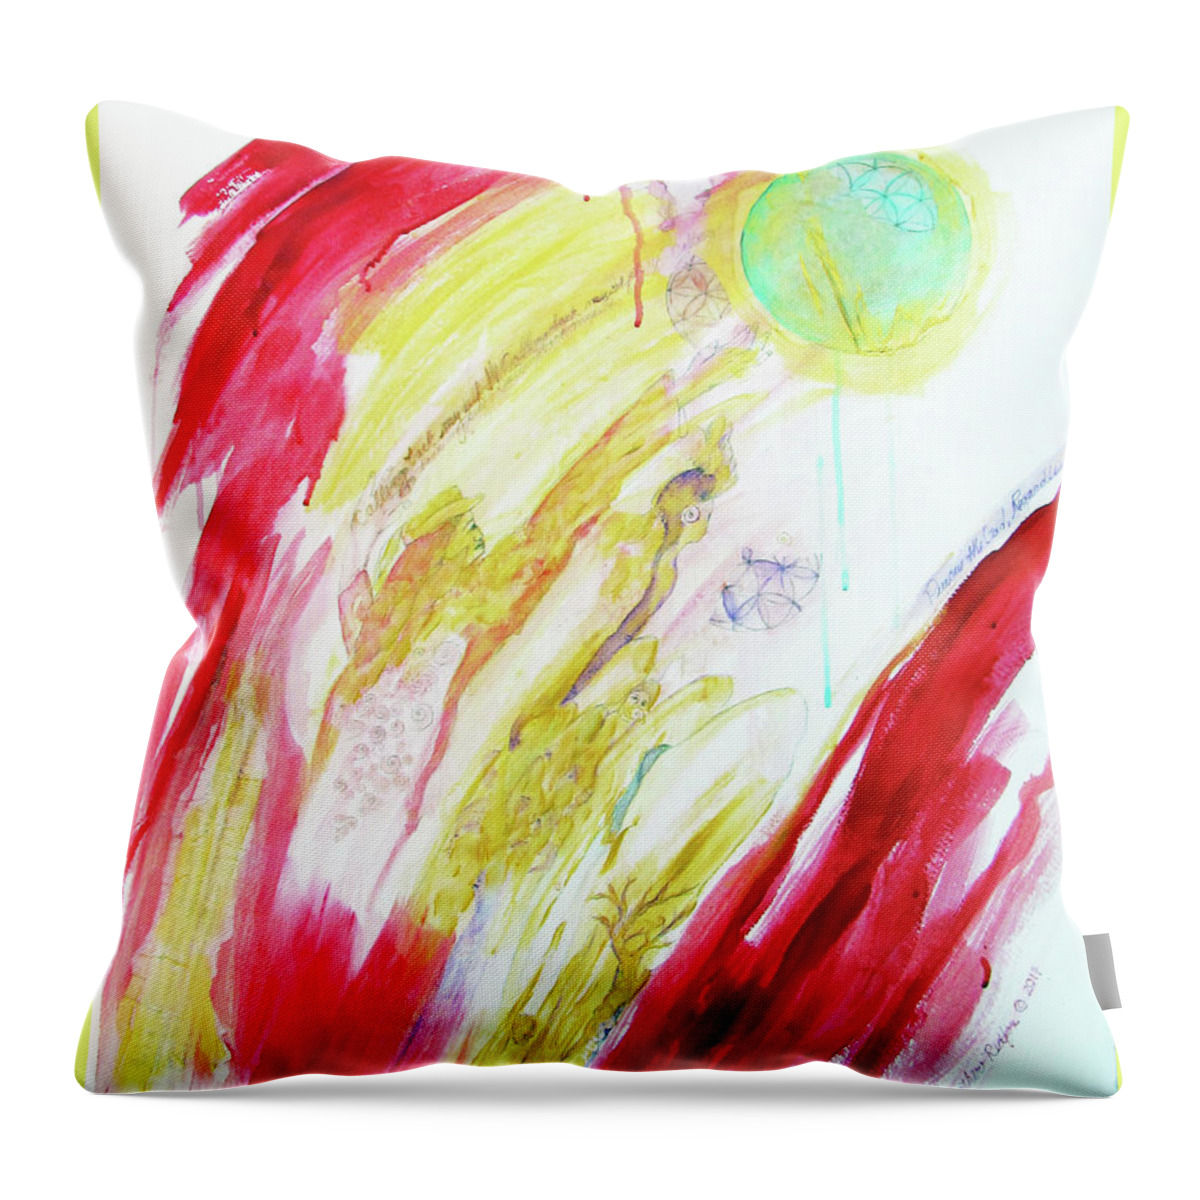 Calling Back Myself Throw Pillow featuring the painting Calling Back Myself by Feather Redfox